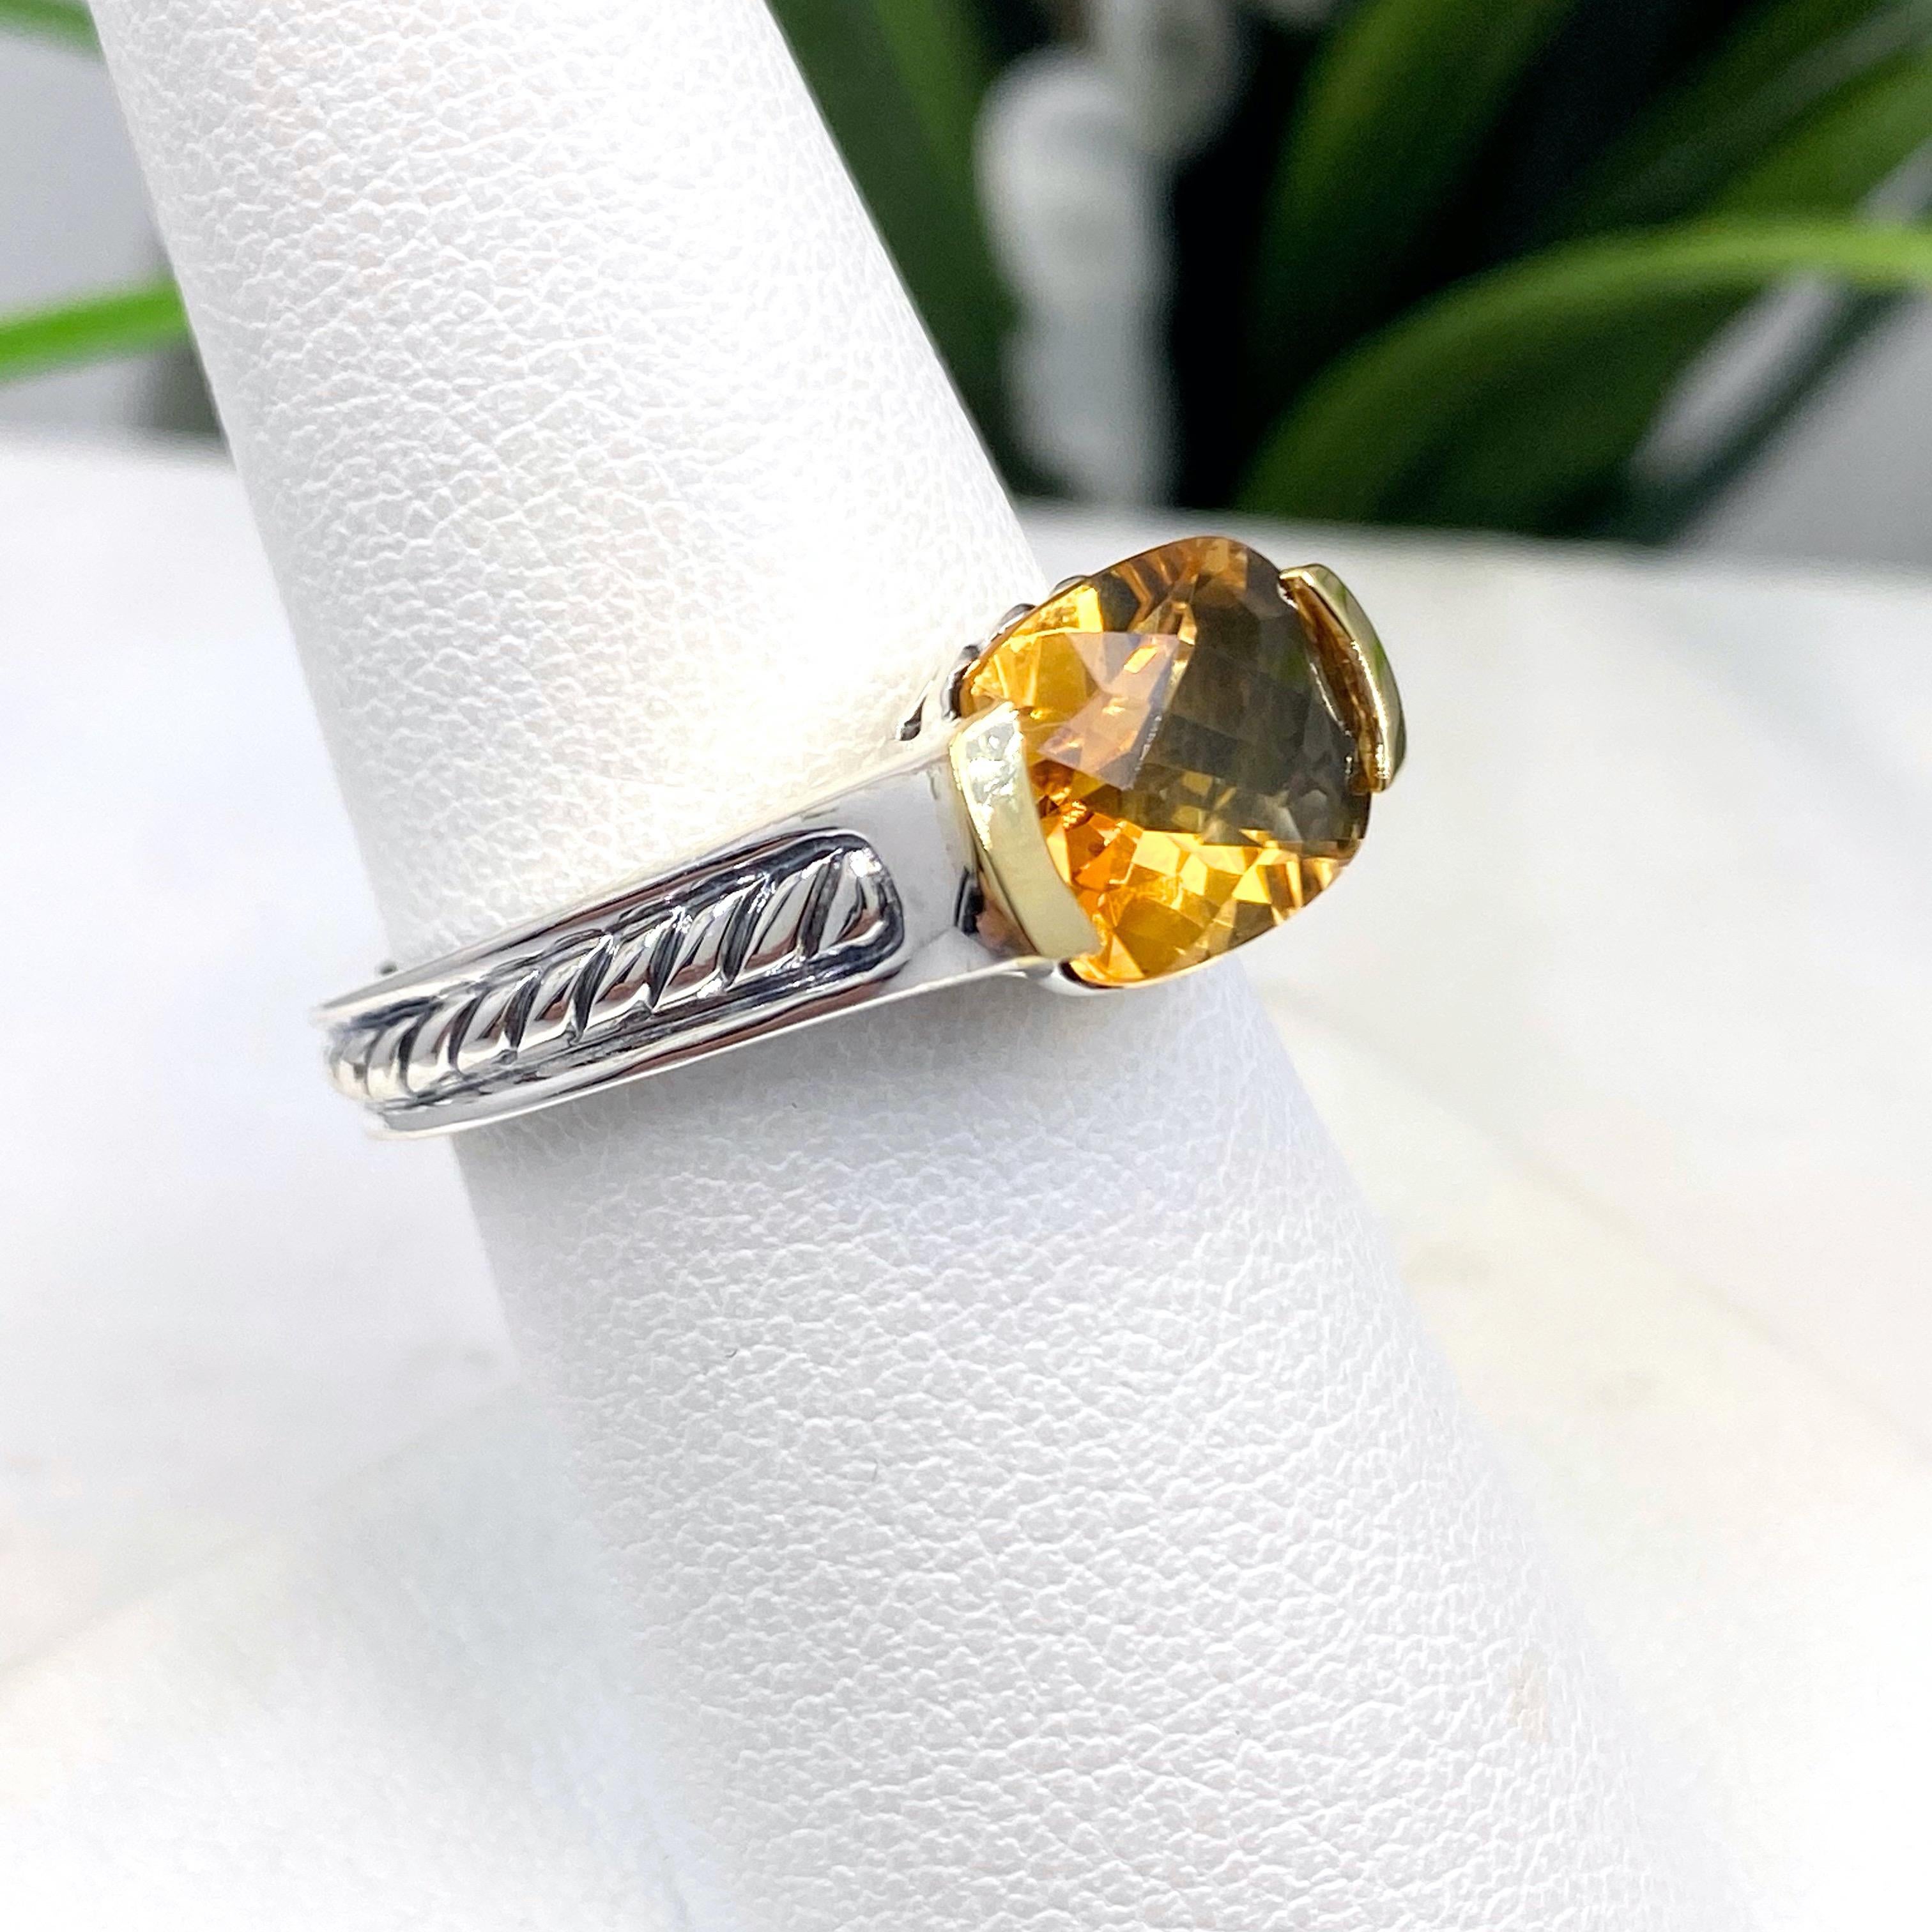 David Yurman Faceted Citrine Ring 18 Karat Yellow Gold and Sterling Silver 3